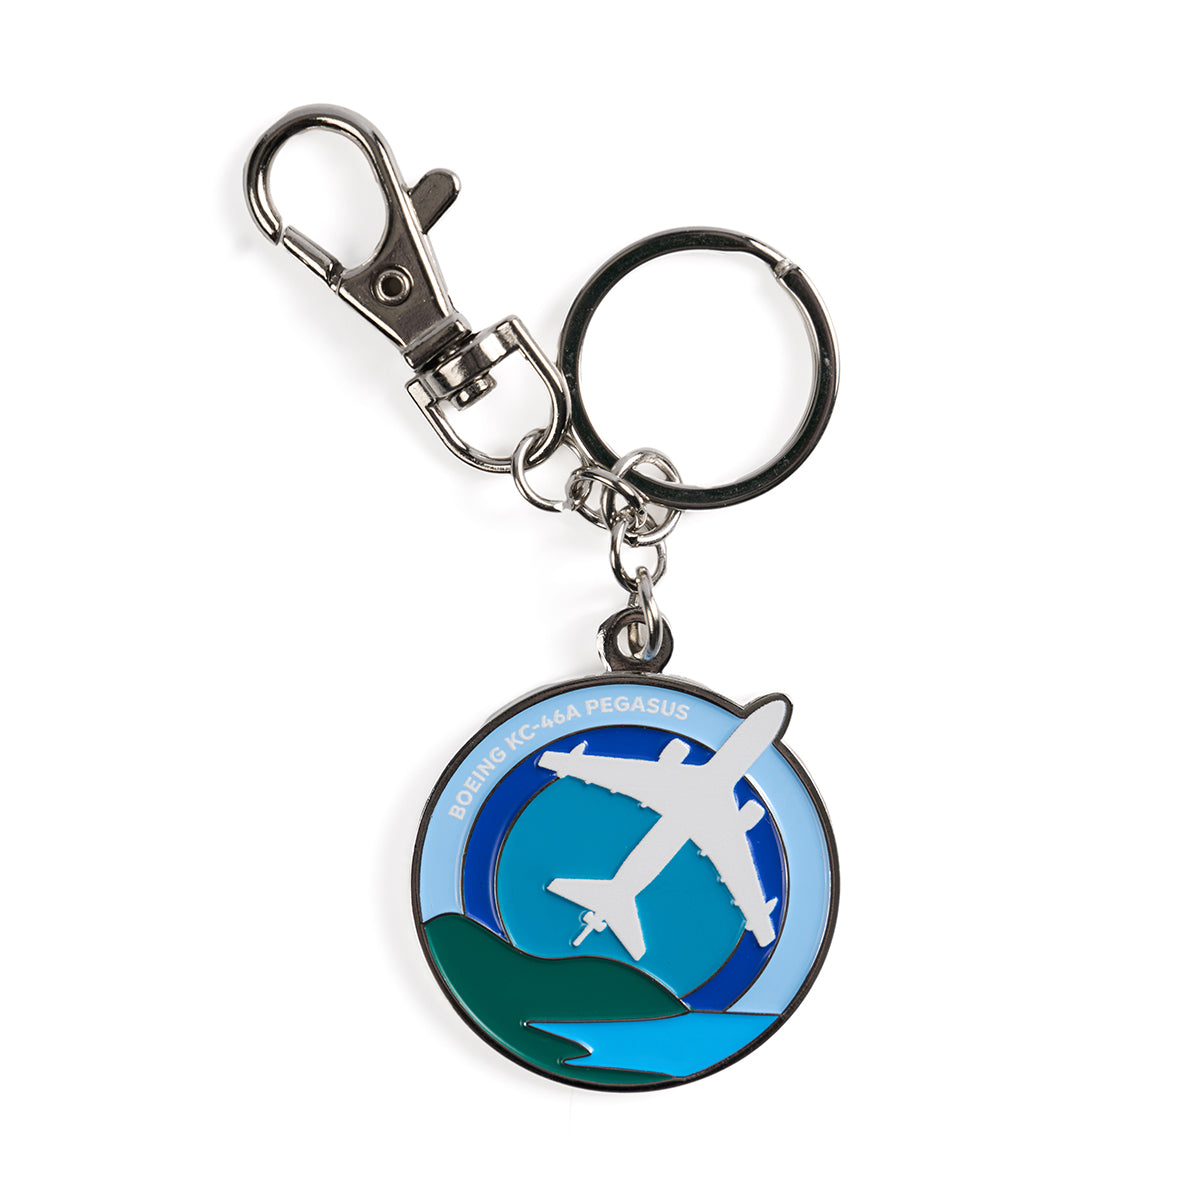 Skyward keychain, featuring the iconic Boeing KC-46 Pegasus in a roundel design.